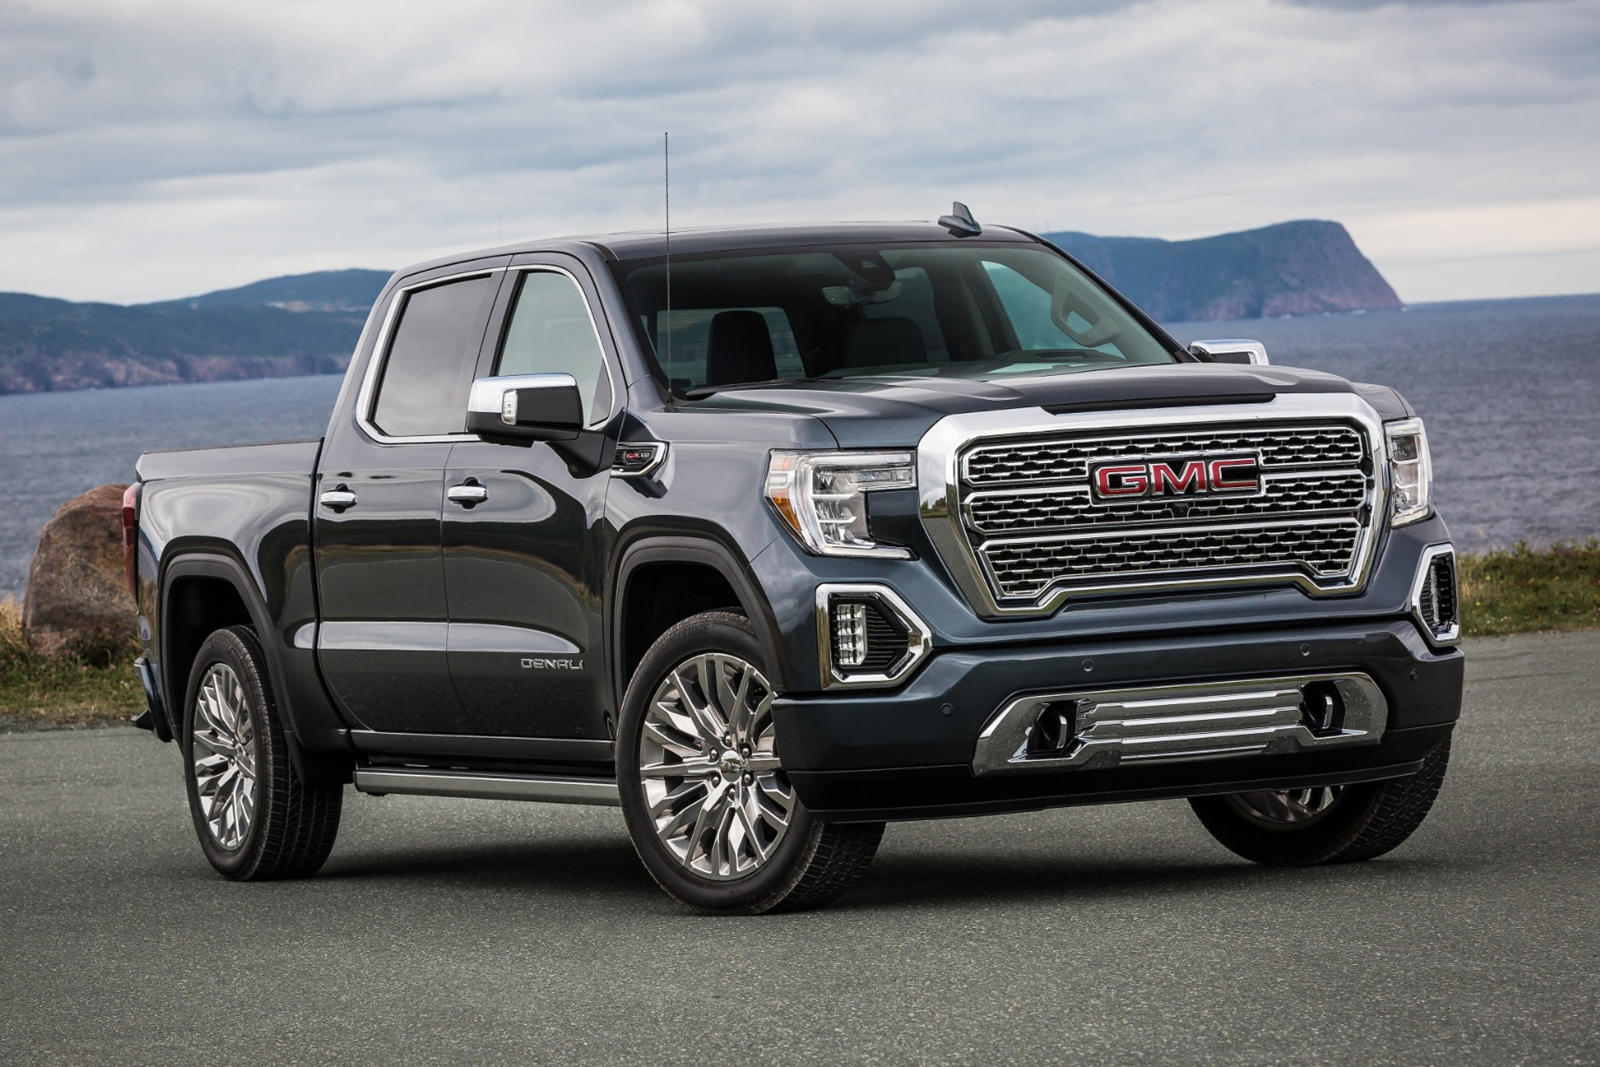 2019-2021 GMC Sierra 1500 Front Angle View Photo.